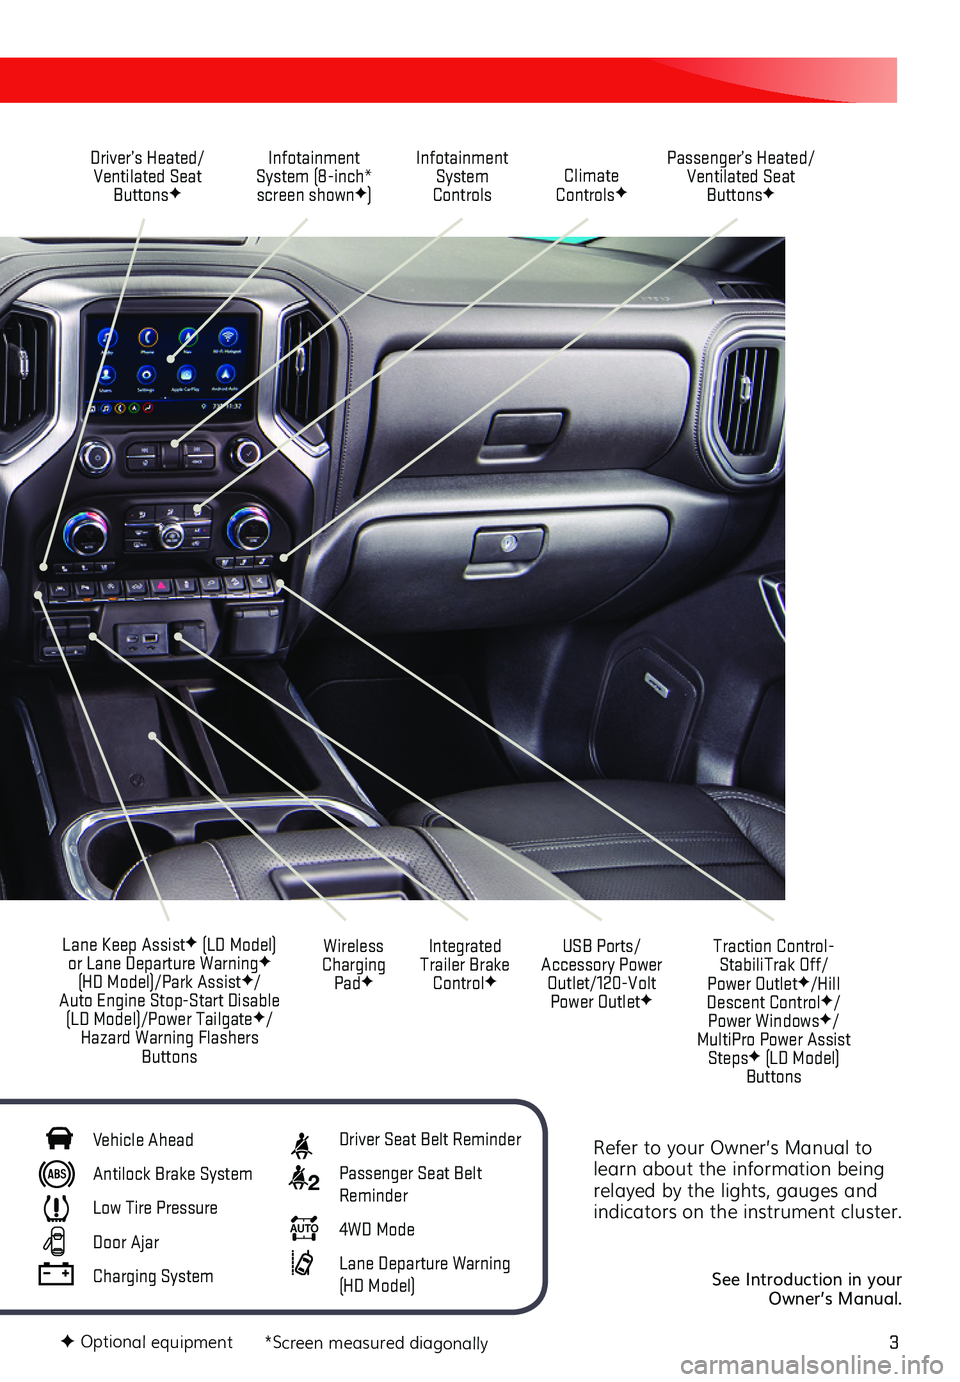 GMC SIERRA 2020  Get To Know Guide 3
Refer to your Owner’s Manual to learn about the information being relayed by the lights, gauges and indicators on the instrument cluster.
 
See Introduction in your Owner’s Manual.
Driver’s He